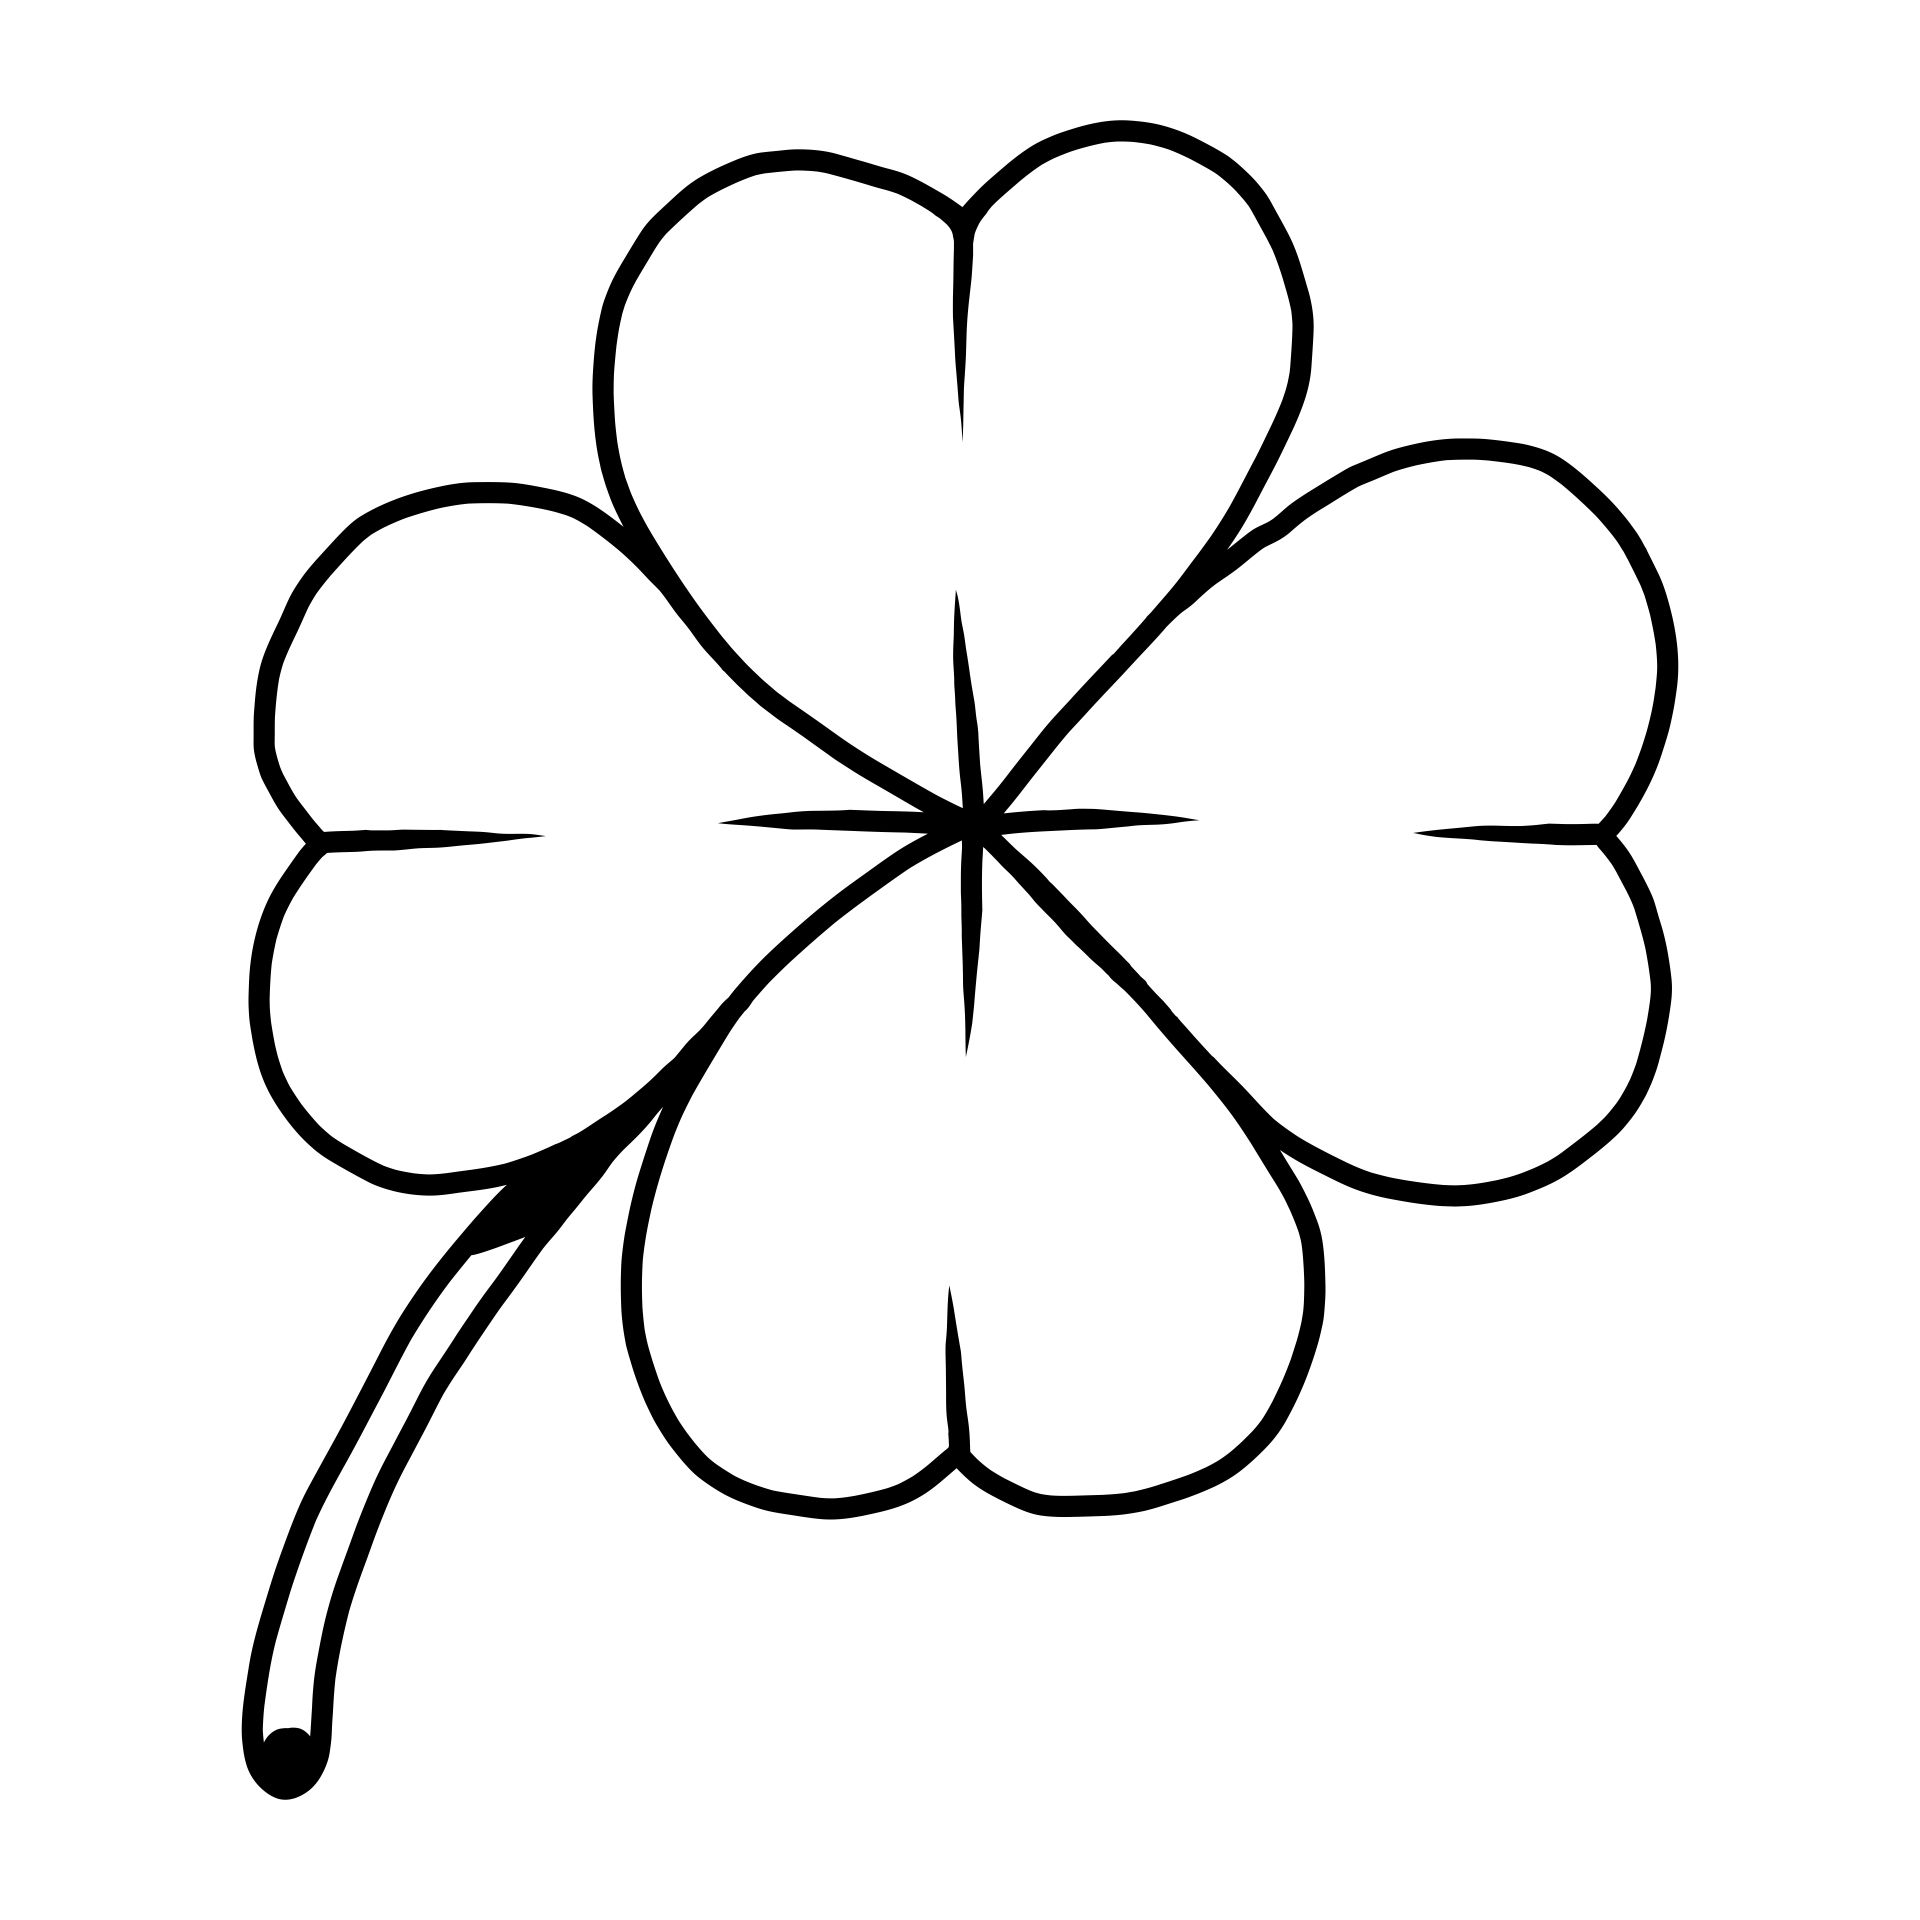 Shamrock Coloring Page Templates